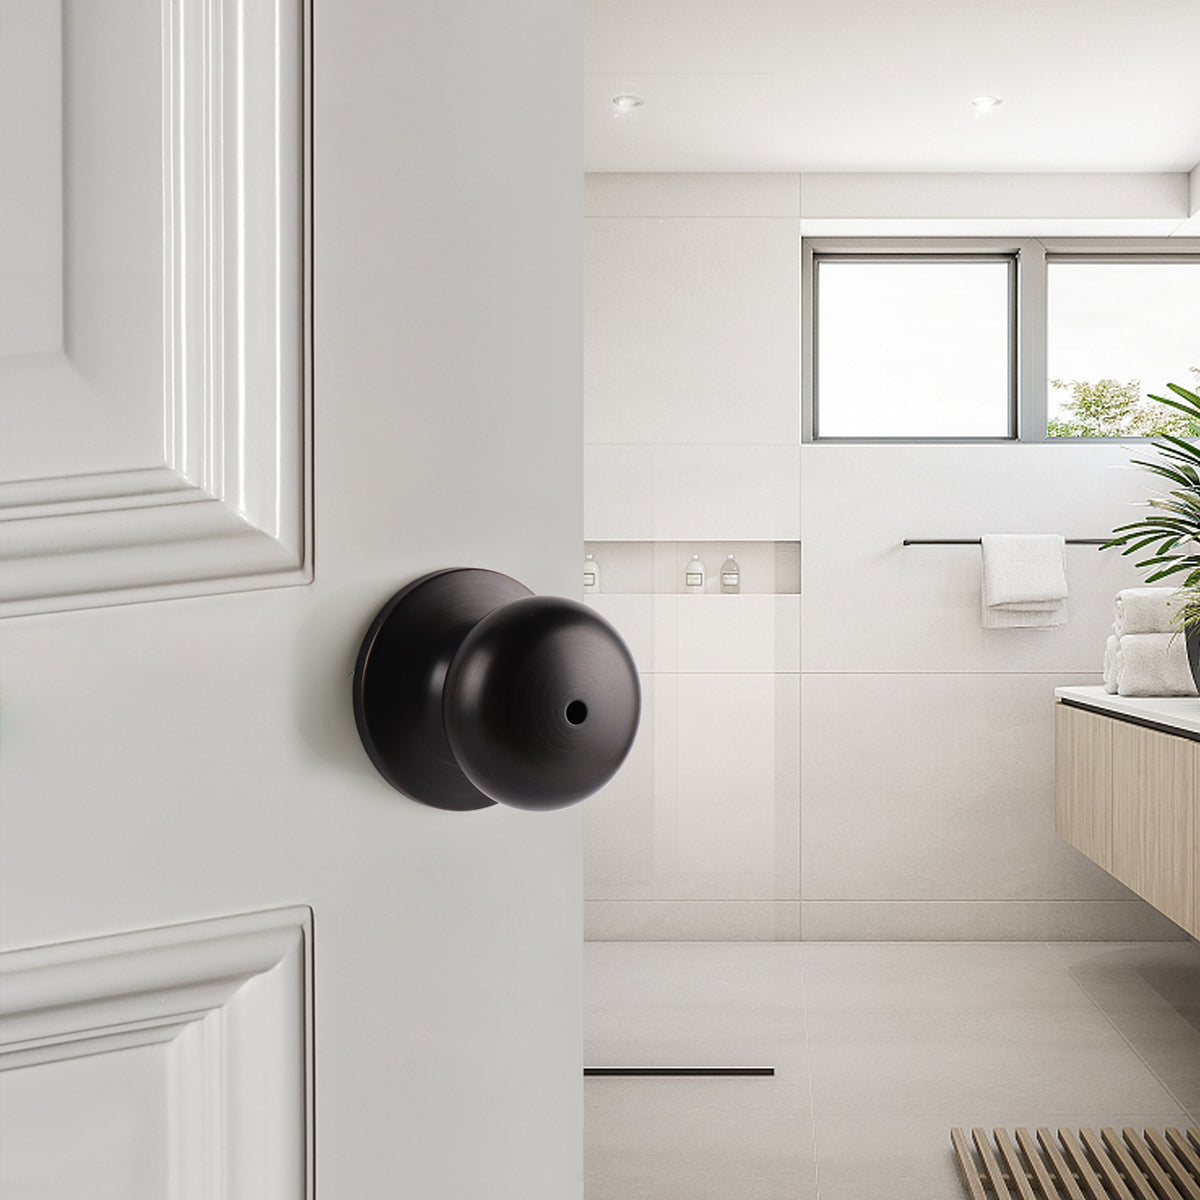 Single Connect Rod Flat Ball Knobs Privacy Door Lock Knob Oil Rubbed Bronze Finish DL5766ORBBK